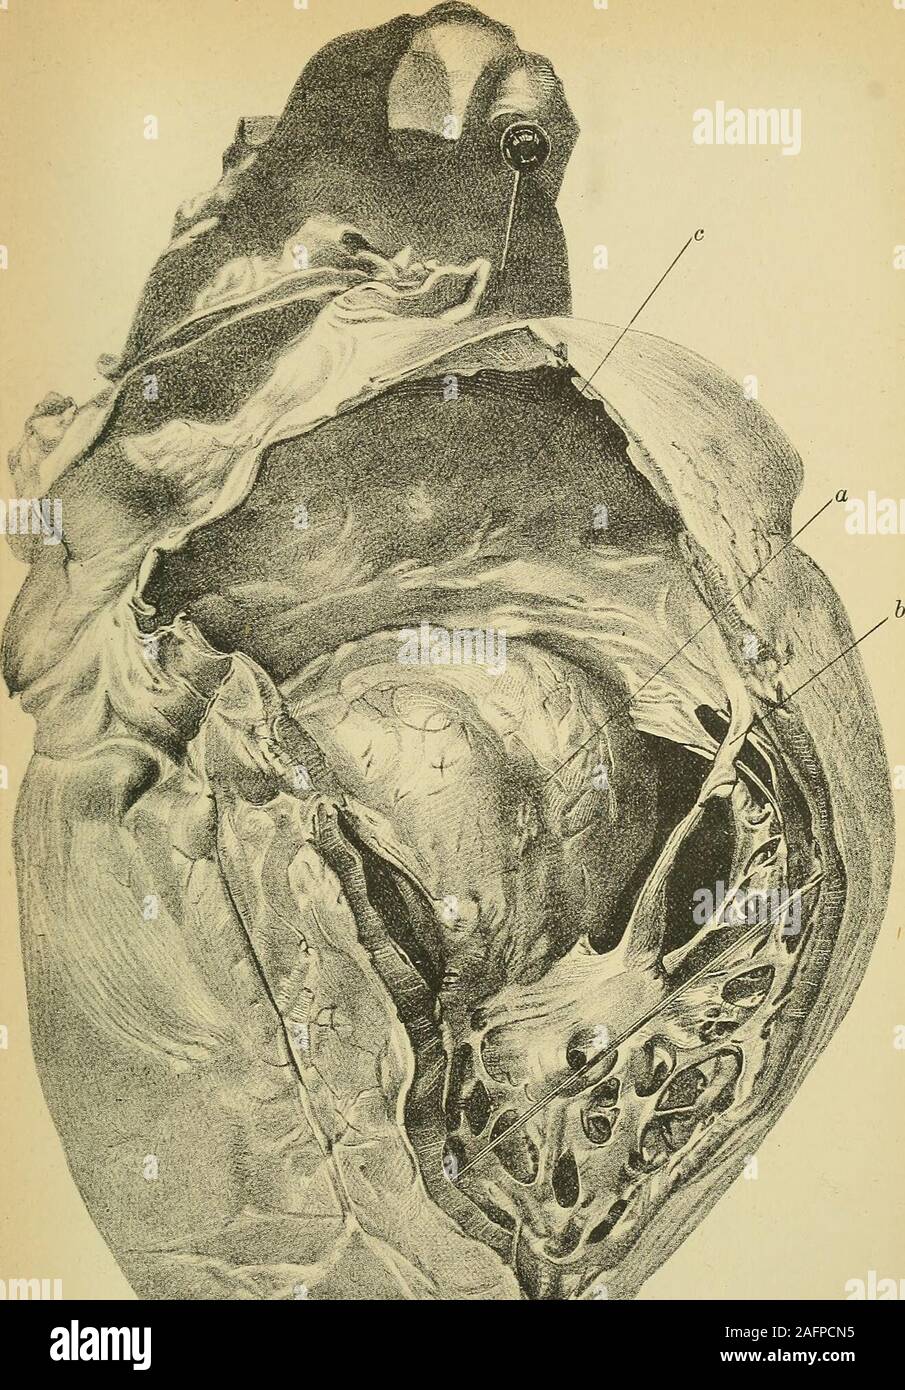 . Diseases of the heart and thoracic aorta. &gt;^^- -r Fig. 243.—Aneurlxm of the left ventricle. {Natural size.) A laree circular opening («) which represents the orifice of the aneurism, is situated in theRpntum ashort distance below the aortic ^p&lt;;raent,s. .,..., nr t ™,VH V,v Pvnfessor Turners penuission from a specimen in the Anatomical Museum of Copied by Professor Turners permissionthe Edinburgh University. MH«.i.lC.-»MC.L.inonoiM;. Fig. 244.—Aneurism oft/ie septum veiUnculoTum {tite same preparation represented in Jig. 243), seenfrom the iirftrior of the right ventricle. {Natural siz Stock Photo